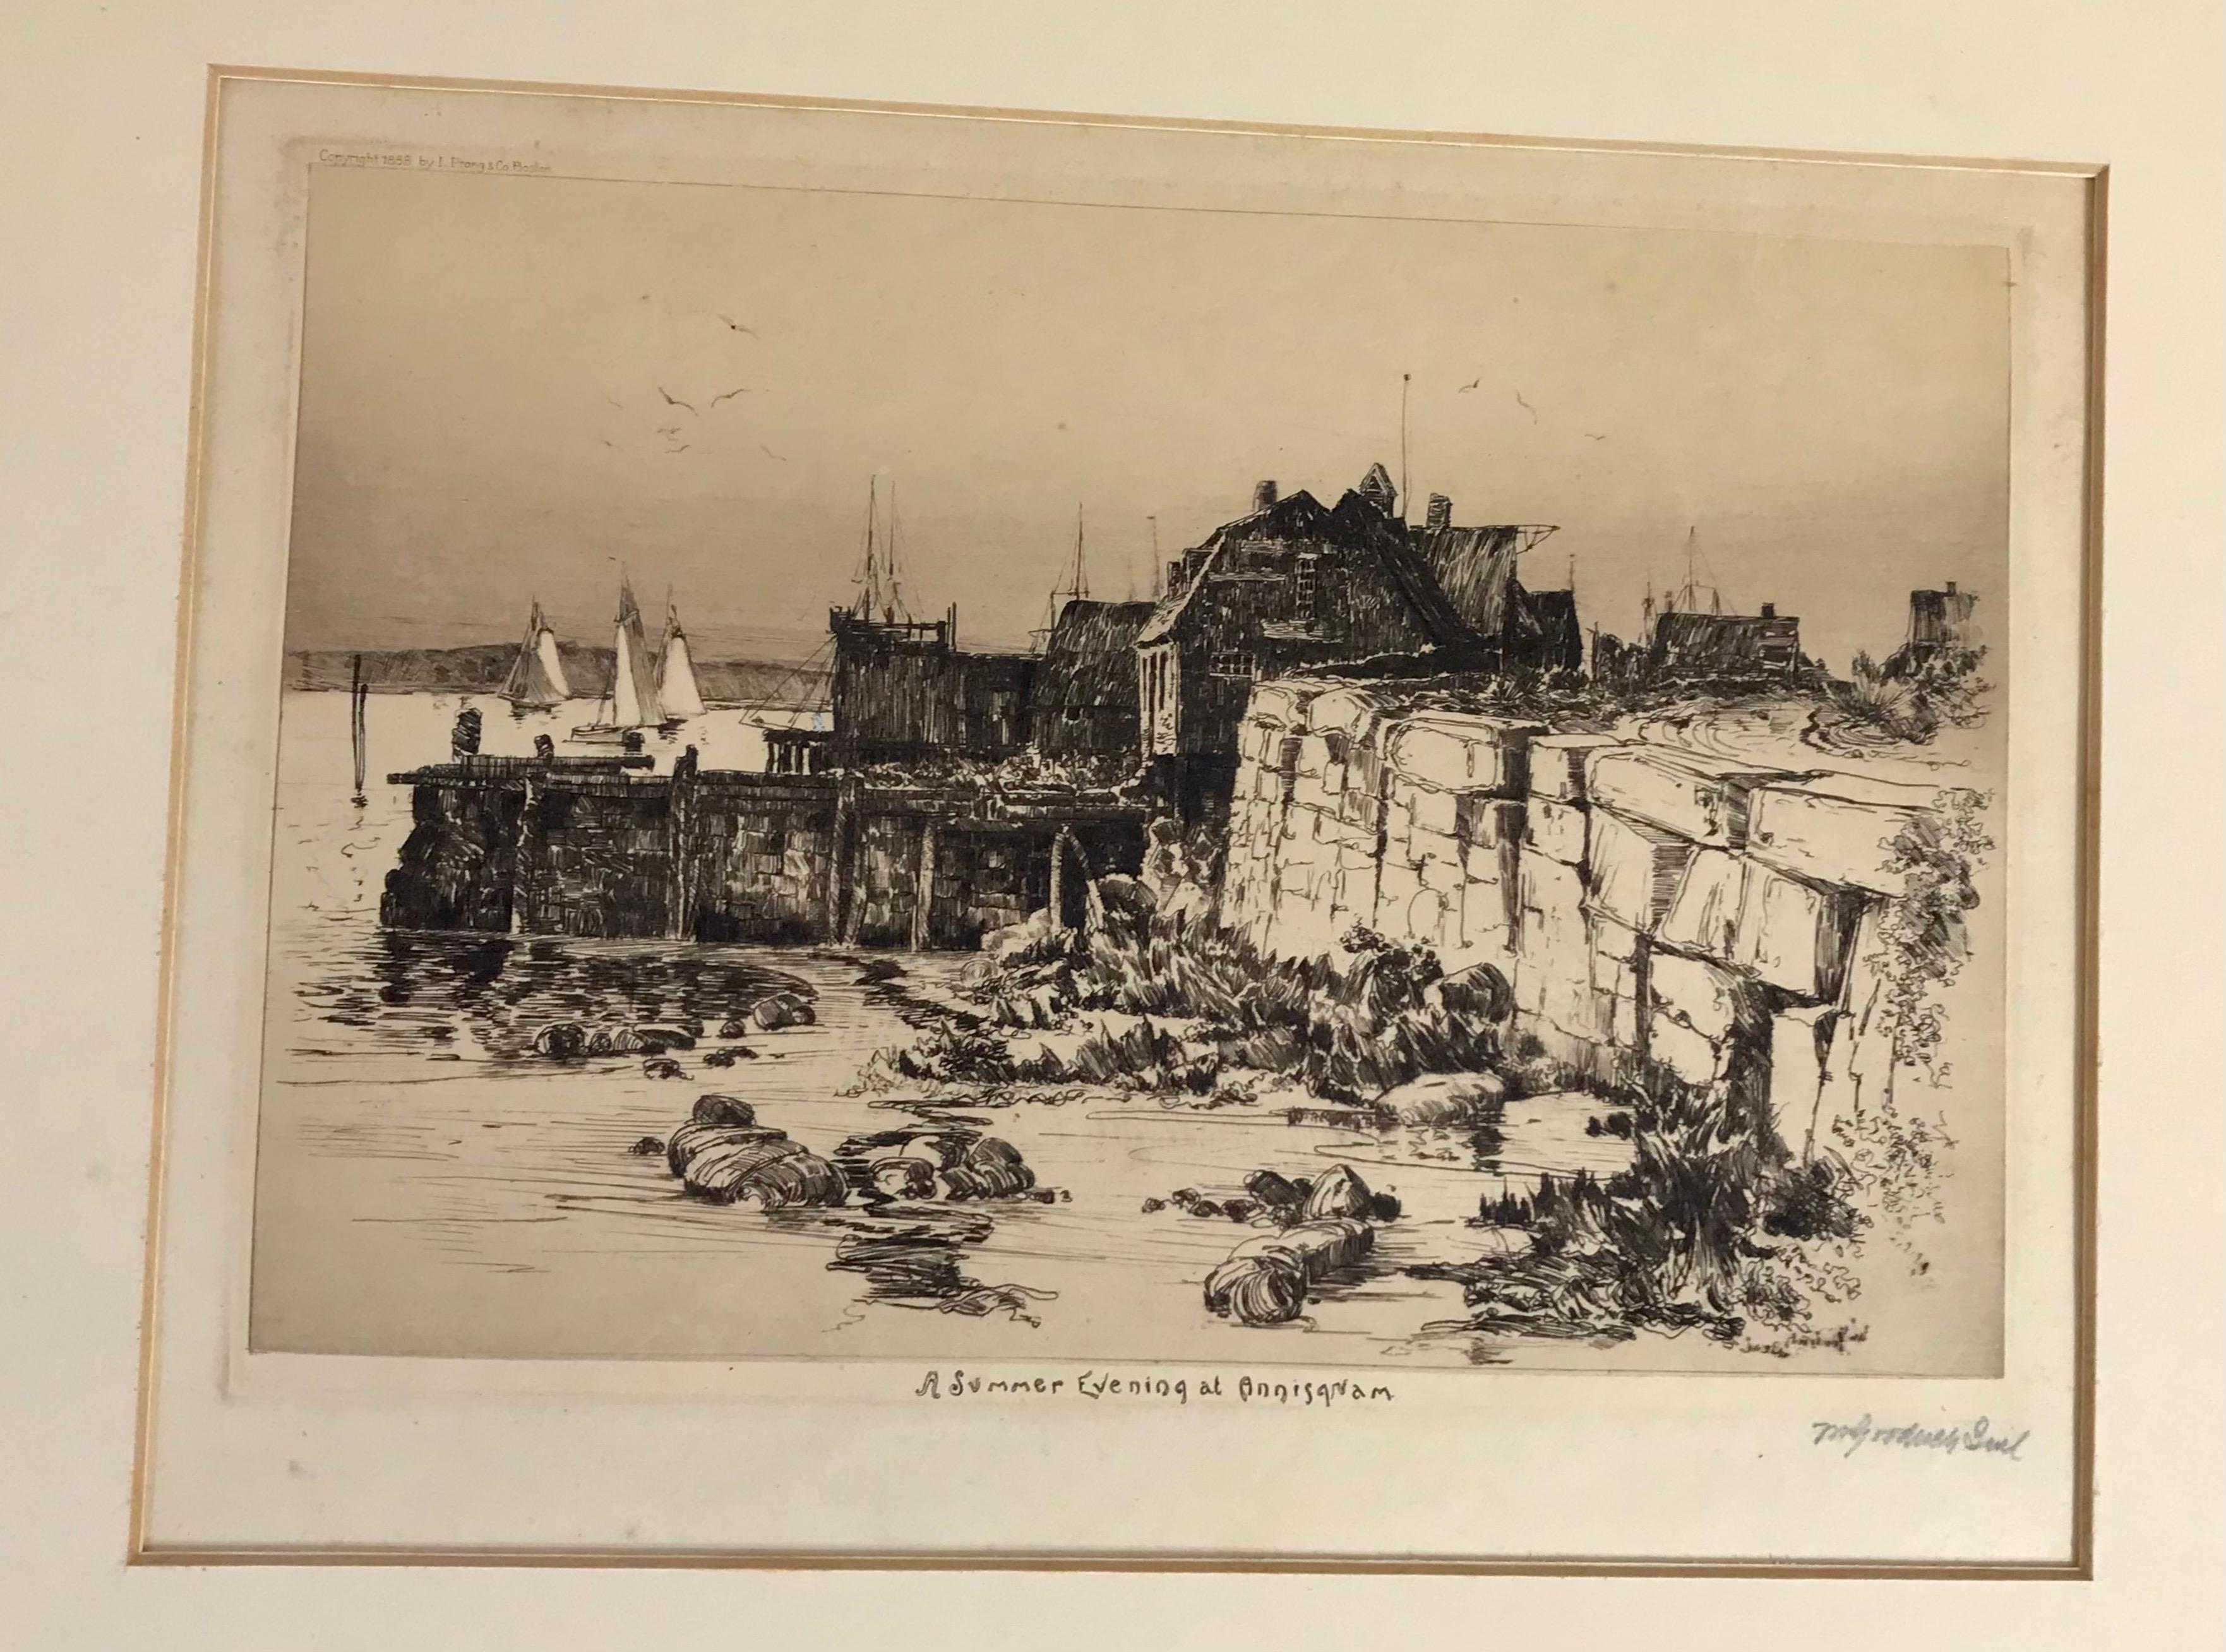 Set of four etchings by American artist William Goodrich Beal, circa 1880s. Scenic Massachusetts coastal towns and beaches. All signed in pencil, lower right corner.

American Artist William Goodrich Beal of Waltham MA is believed to have been